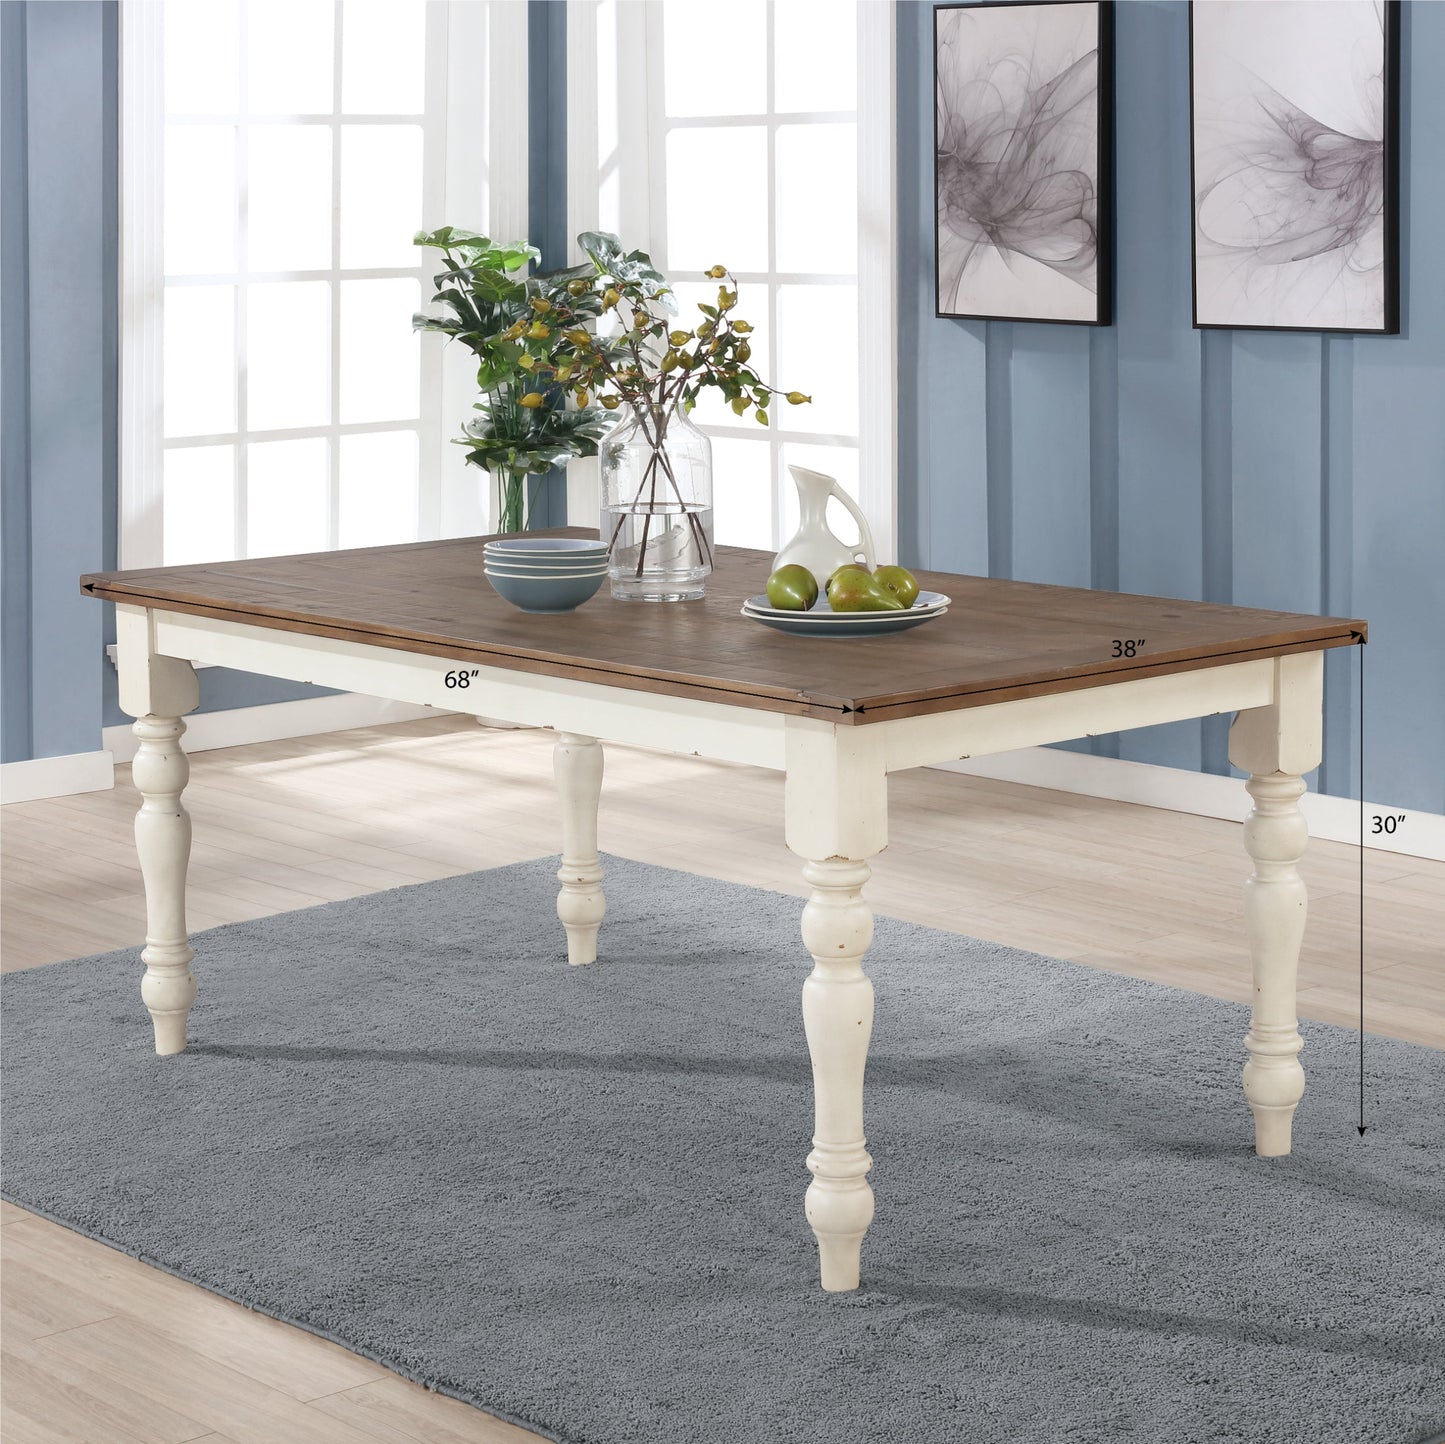 Prato Antique White and Distressed Oak Two-tone Finish Wood Dining Table